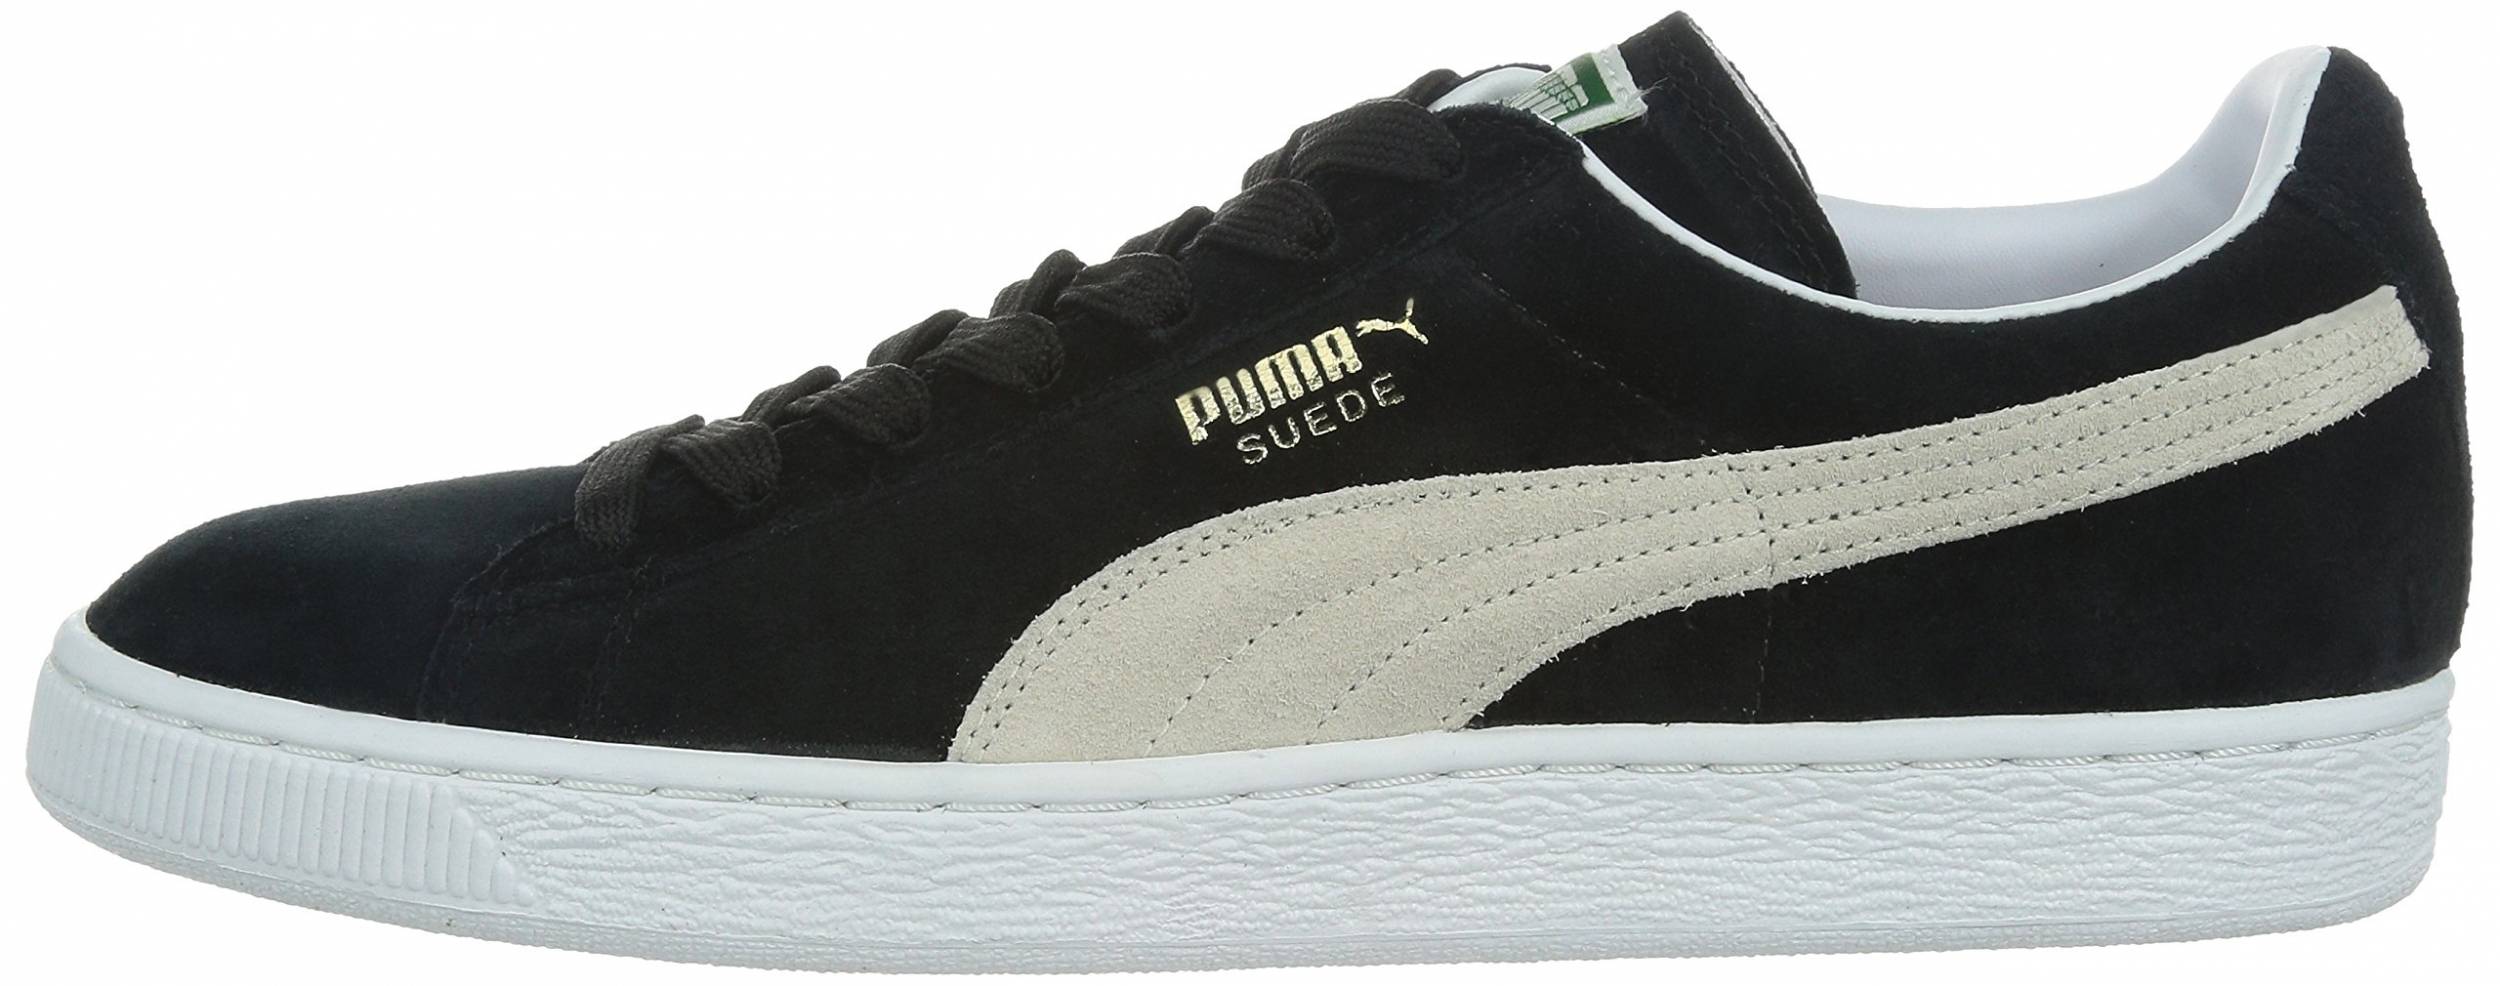 Save 58% on Puma Cheap Sneakers (52 